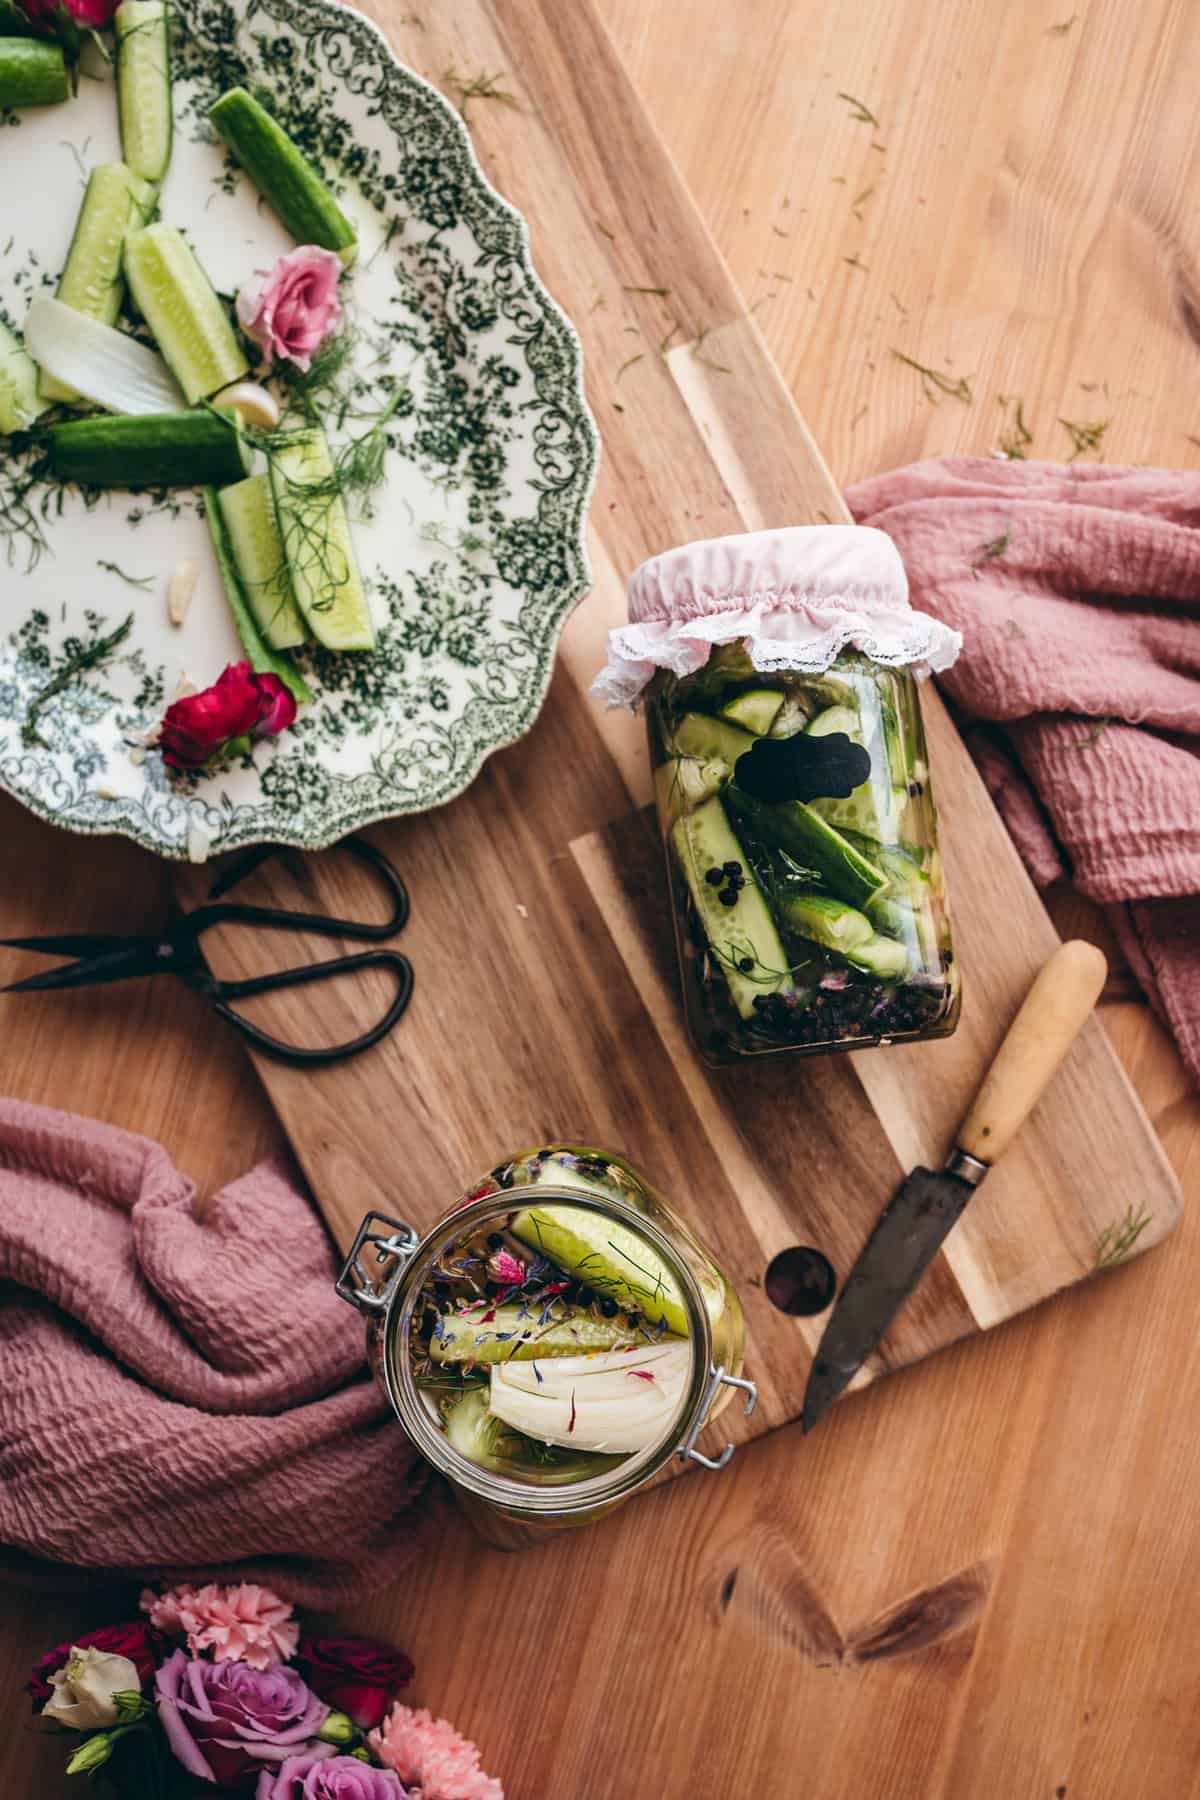 apple cider vinegar pickles cover image, open bottle of pickles on left hand corner of image with dried edible flower petals, sliced cucumbers and salt. a closed jar of pickles labeled pickles with a pink jar lid cover, and a green vintange victorian style plate with sliced pickles, dill, and pink flowers, next to a pair of scissors and a knife on top of a pink cheesecloth